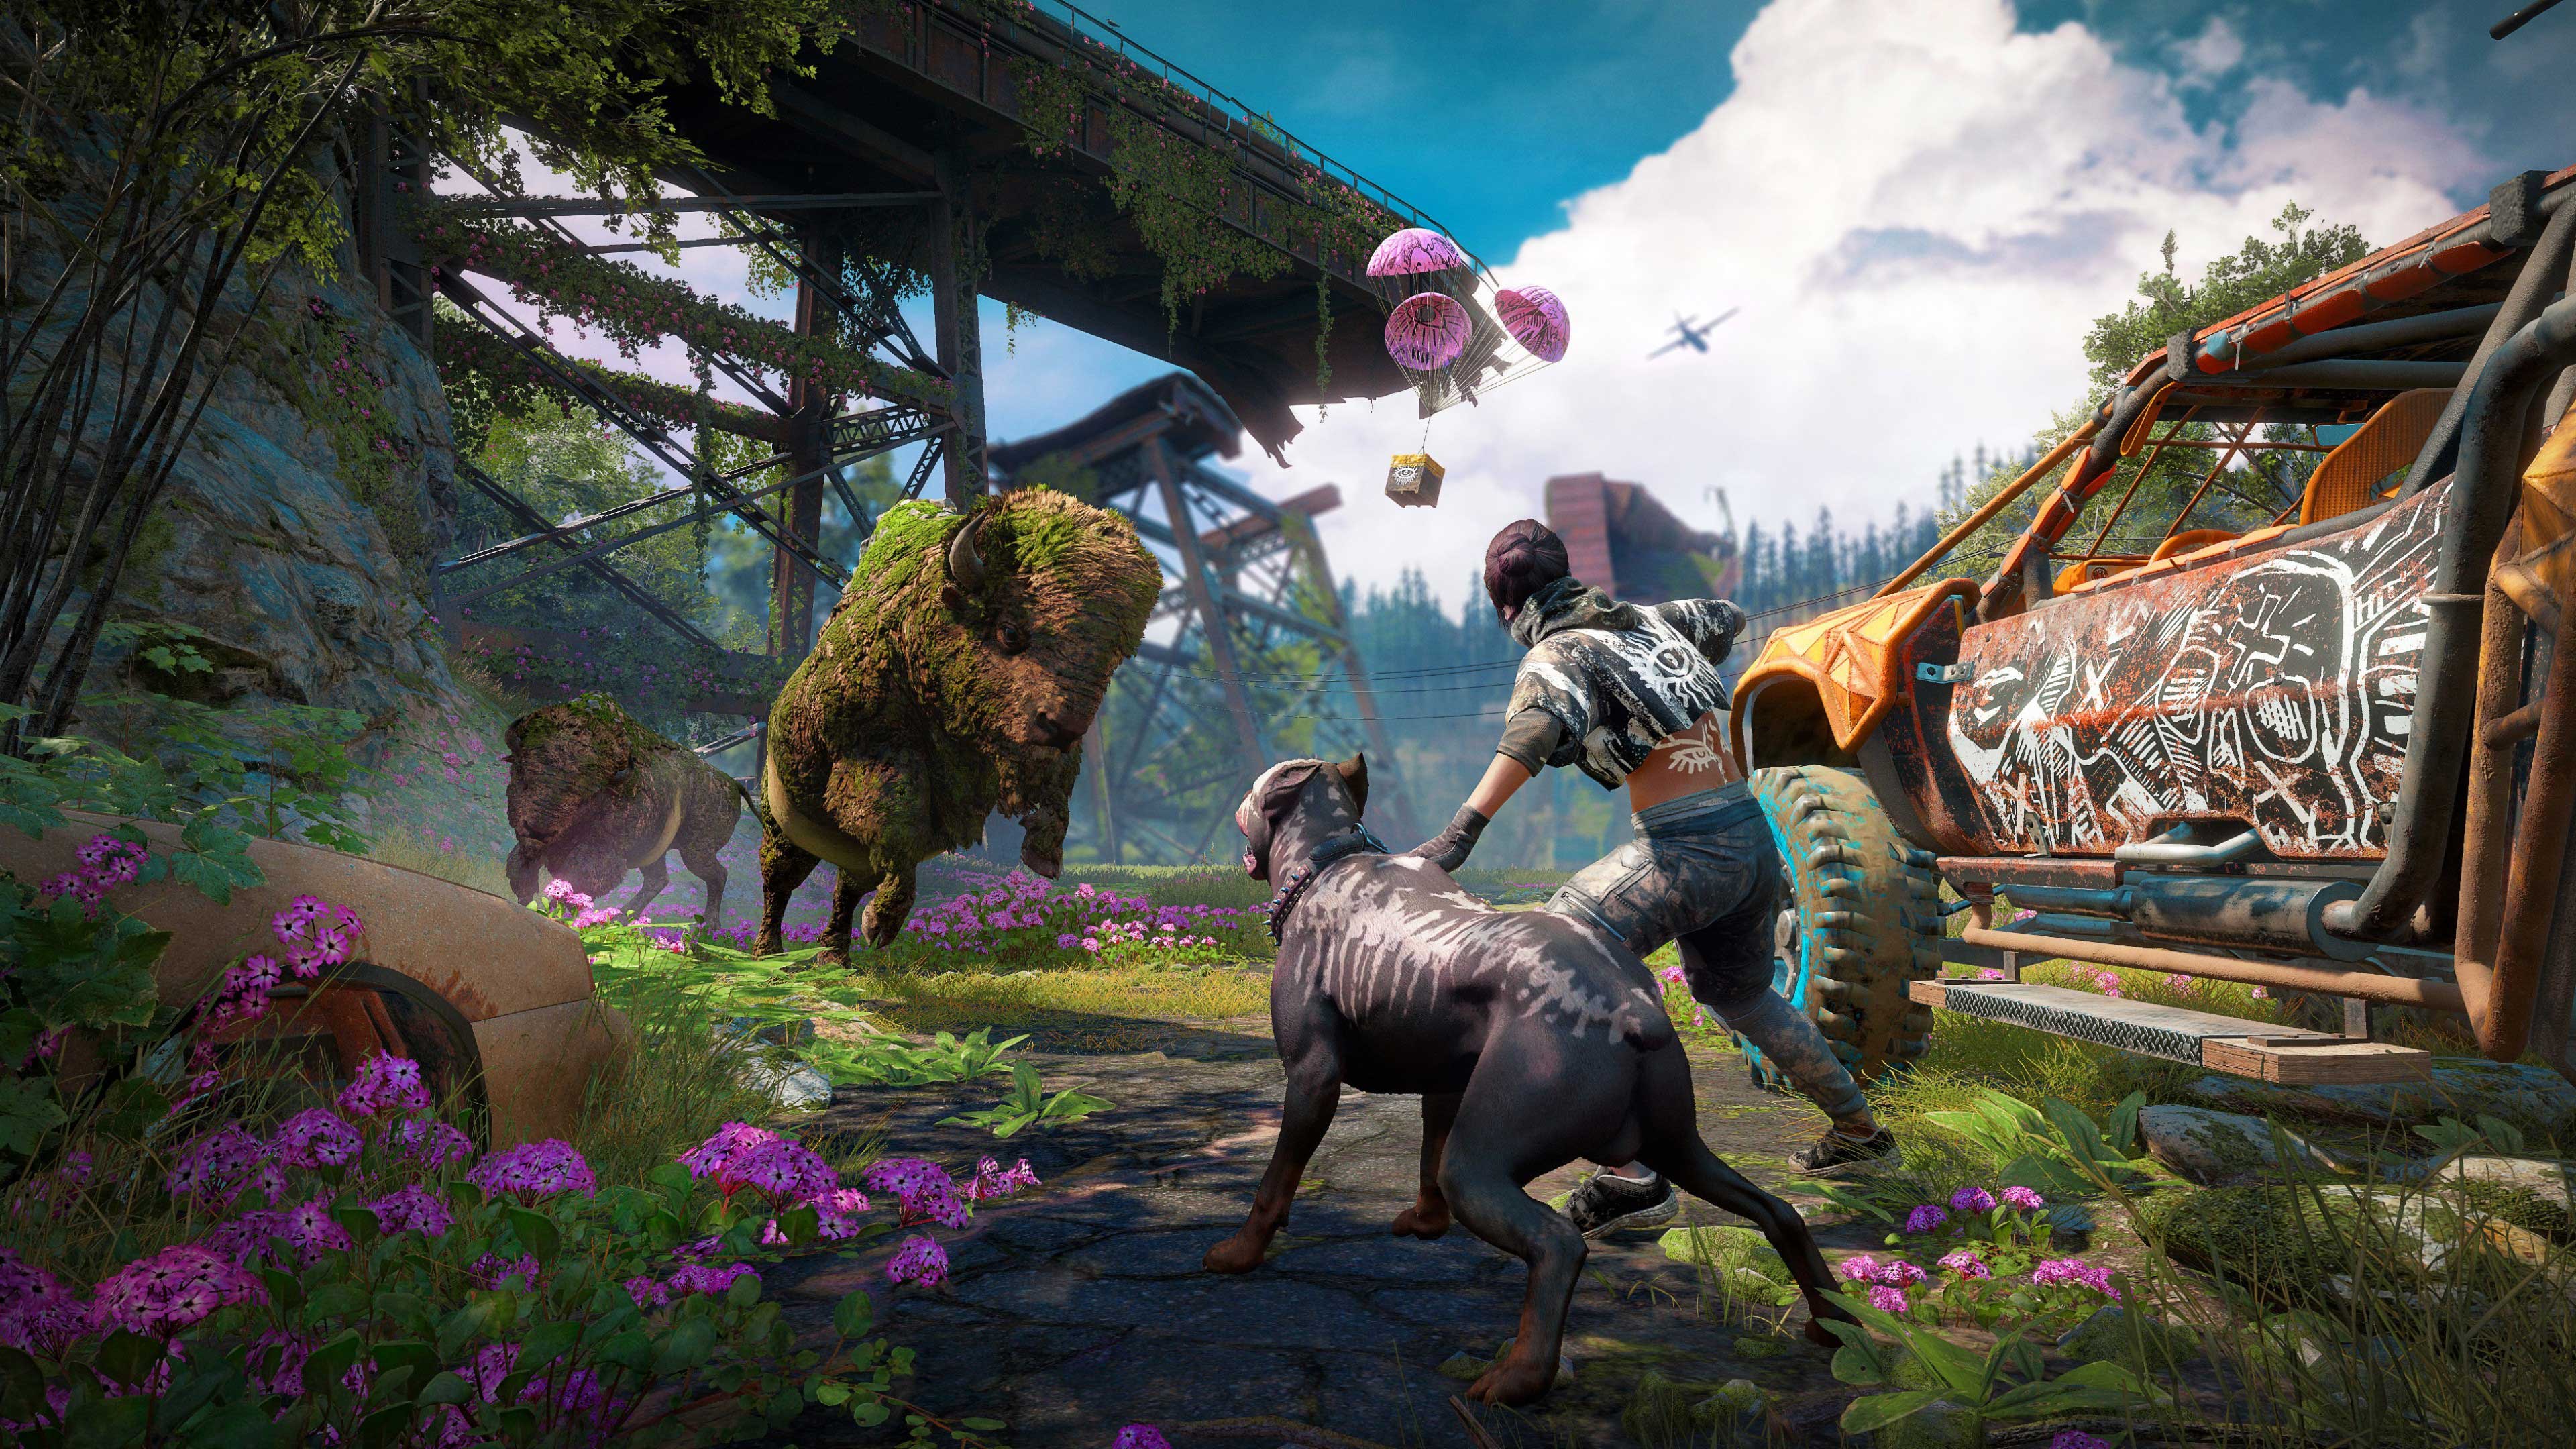 download free 4k far cry 4